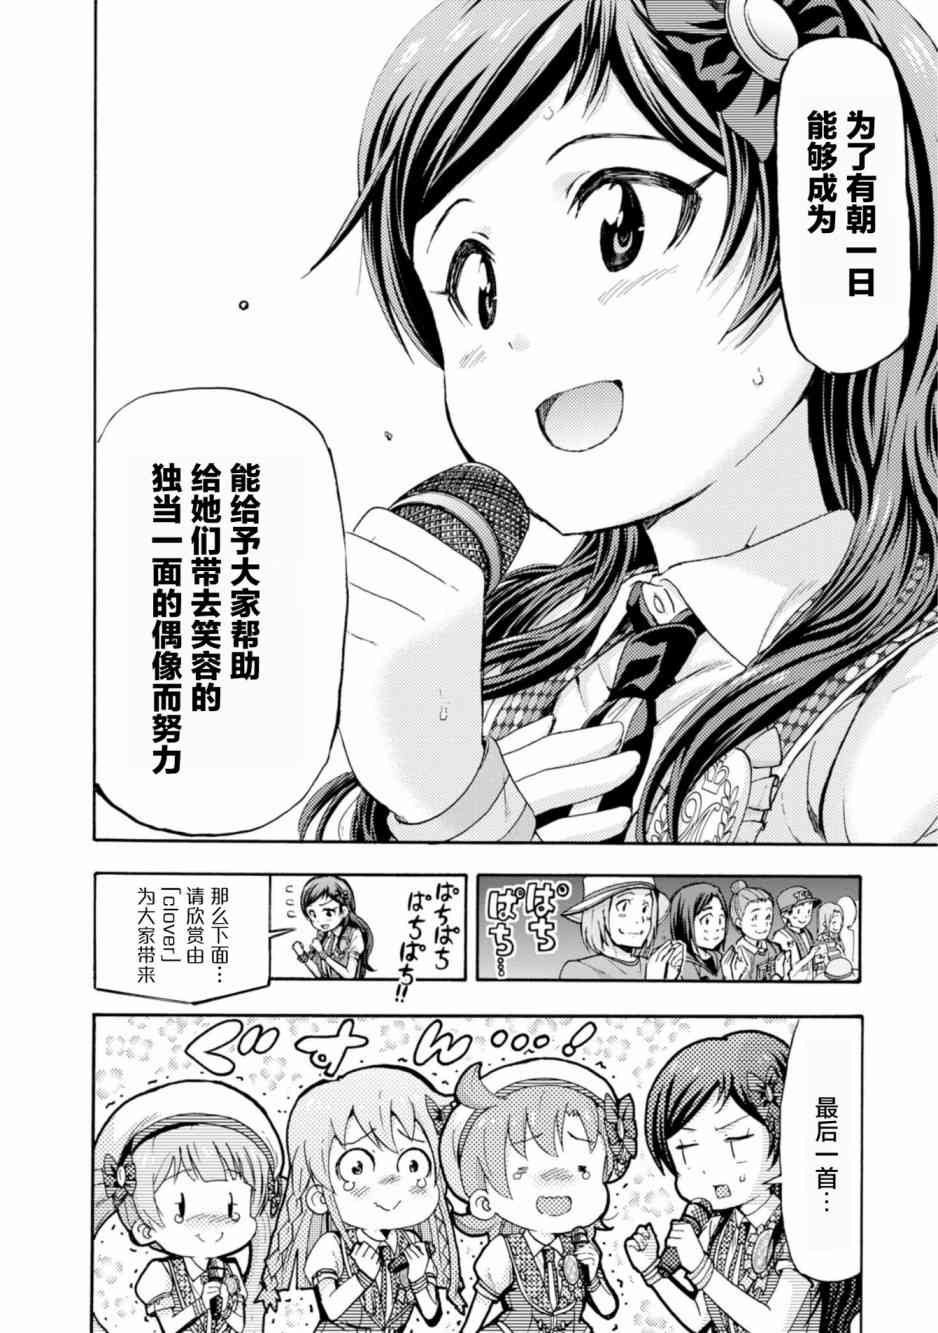 THE IDOLM@STER MILLION LIVE! Blooming Clover - 18話(1/2) - 7